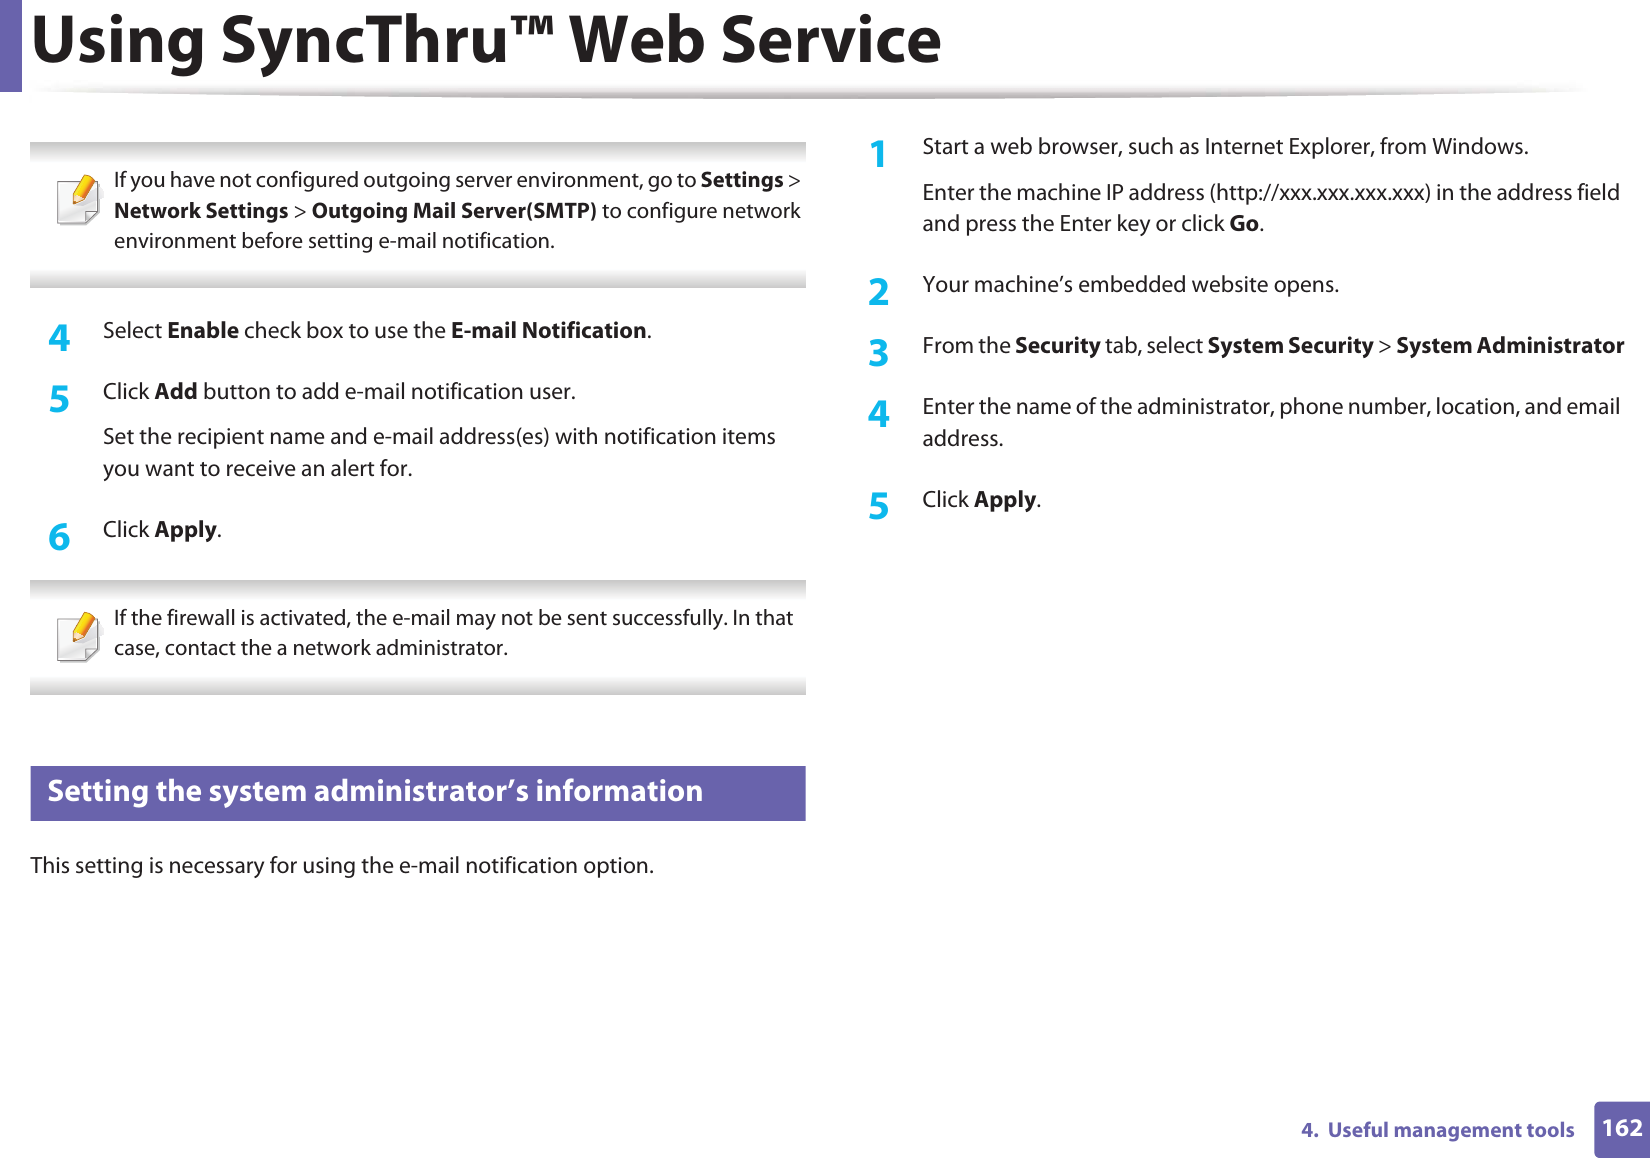 Using SyncThru™ Web Service1624.  Useful management tools If you have not configured outgoing server environment, go to Settings &gt; Network Settings &gt; Outgoing Mail Server(SMTP) to configure network environment before setting e-mail notification.  4  Select Enable check box to use the E-mail Notification.5  Click Add button to add e-mail notification user. Set the recipient name and e-mail address(es) with notification items you want to receive an alert for.6  Click Apply. If the firewall is activated, the e-mail may not be sent successfully. In that case, contact the a network administrator. 4 Setting the system administrator’s informationThis setting is necessary for using the e-mail notification option.1Start a web browser, such as Internet Explorer, from Windows.Enter the machine IP address (http://xxx.xxx.xxx.xxx) in the address field and press the Enter key or click Go.2  Your machine’s embedded website opens.3  From the Security tab, select System Security &gt; System Administrator4  Enter the name of the administrator, phone number, location, and email address. 5  Click Apply. 